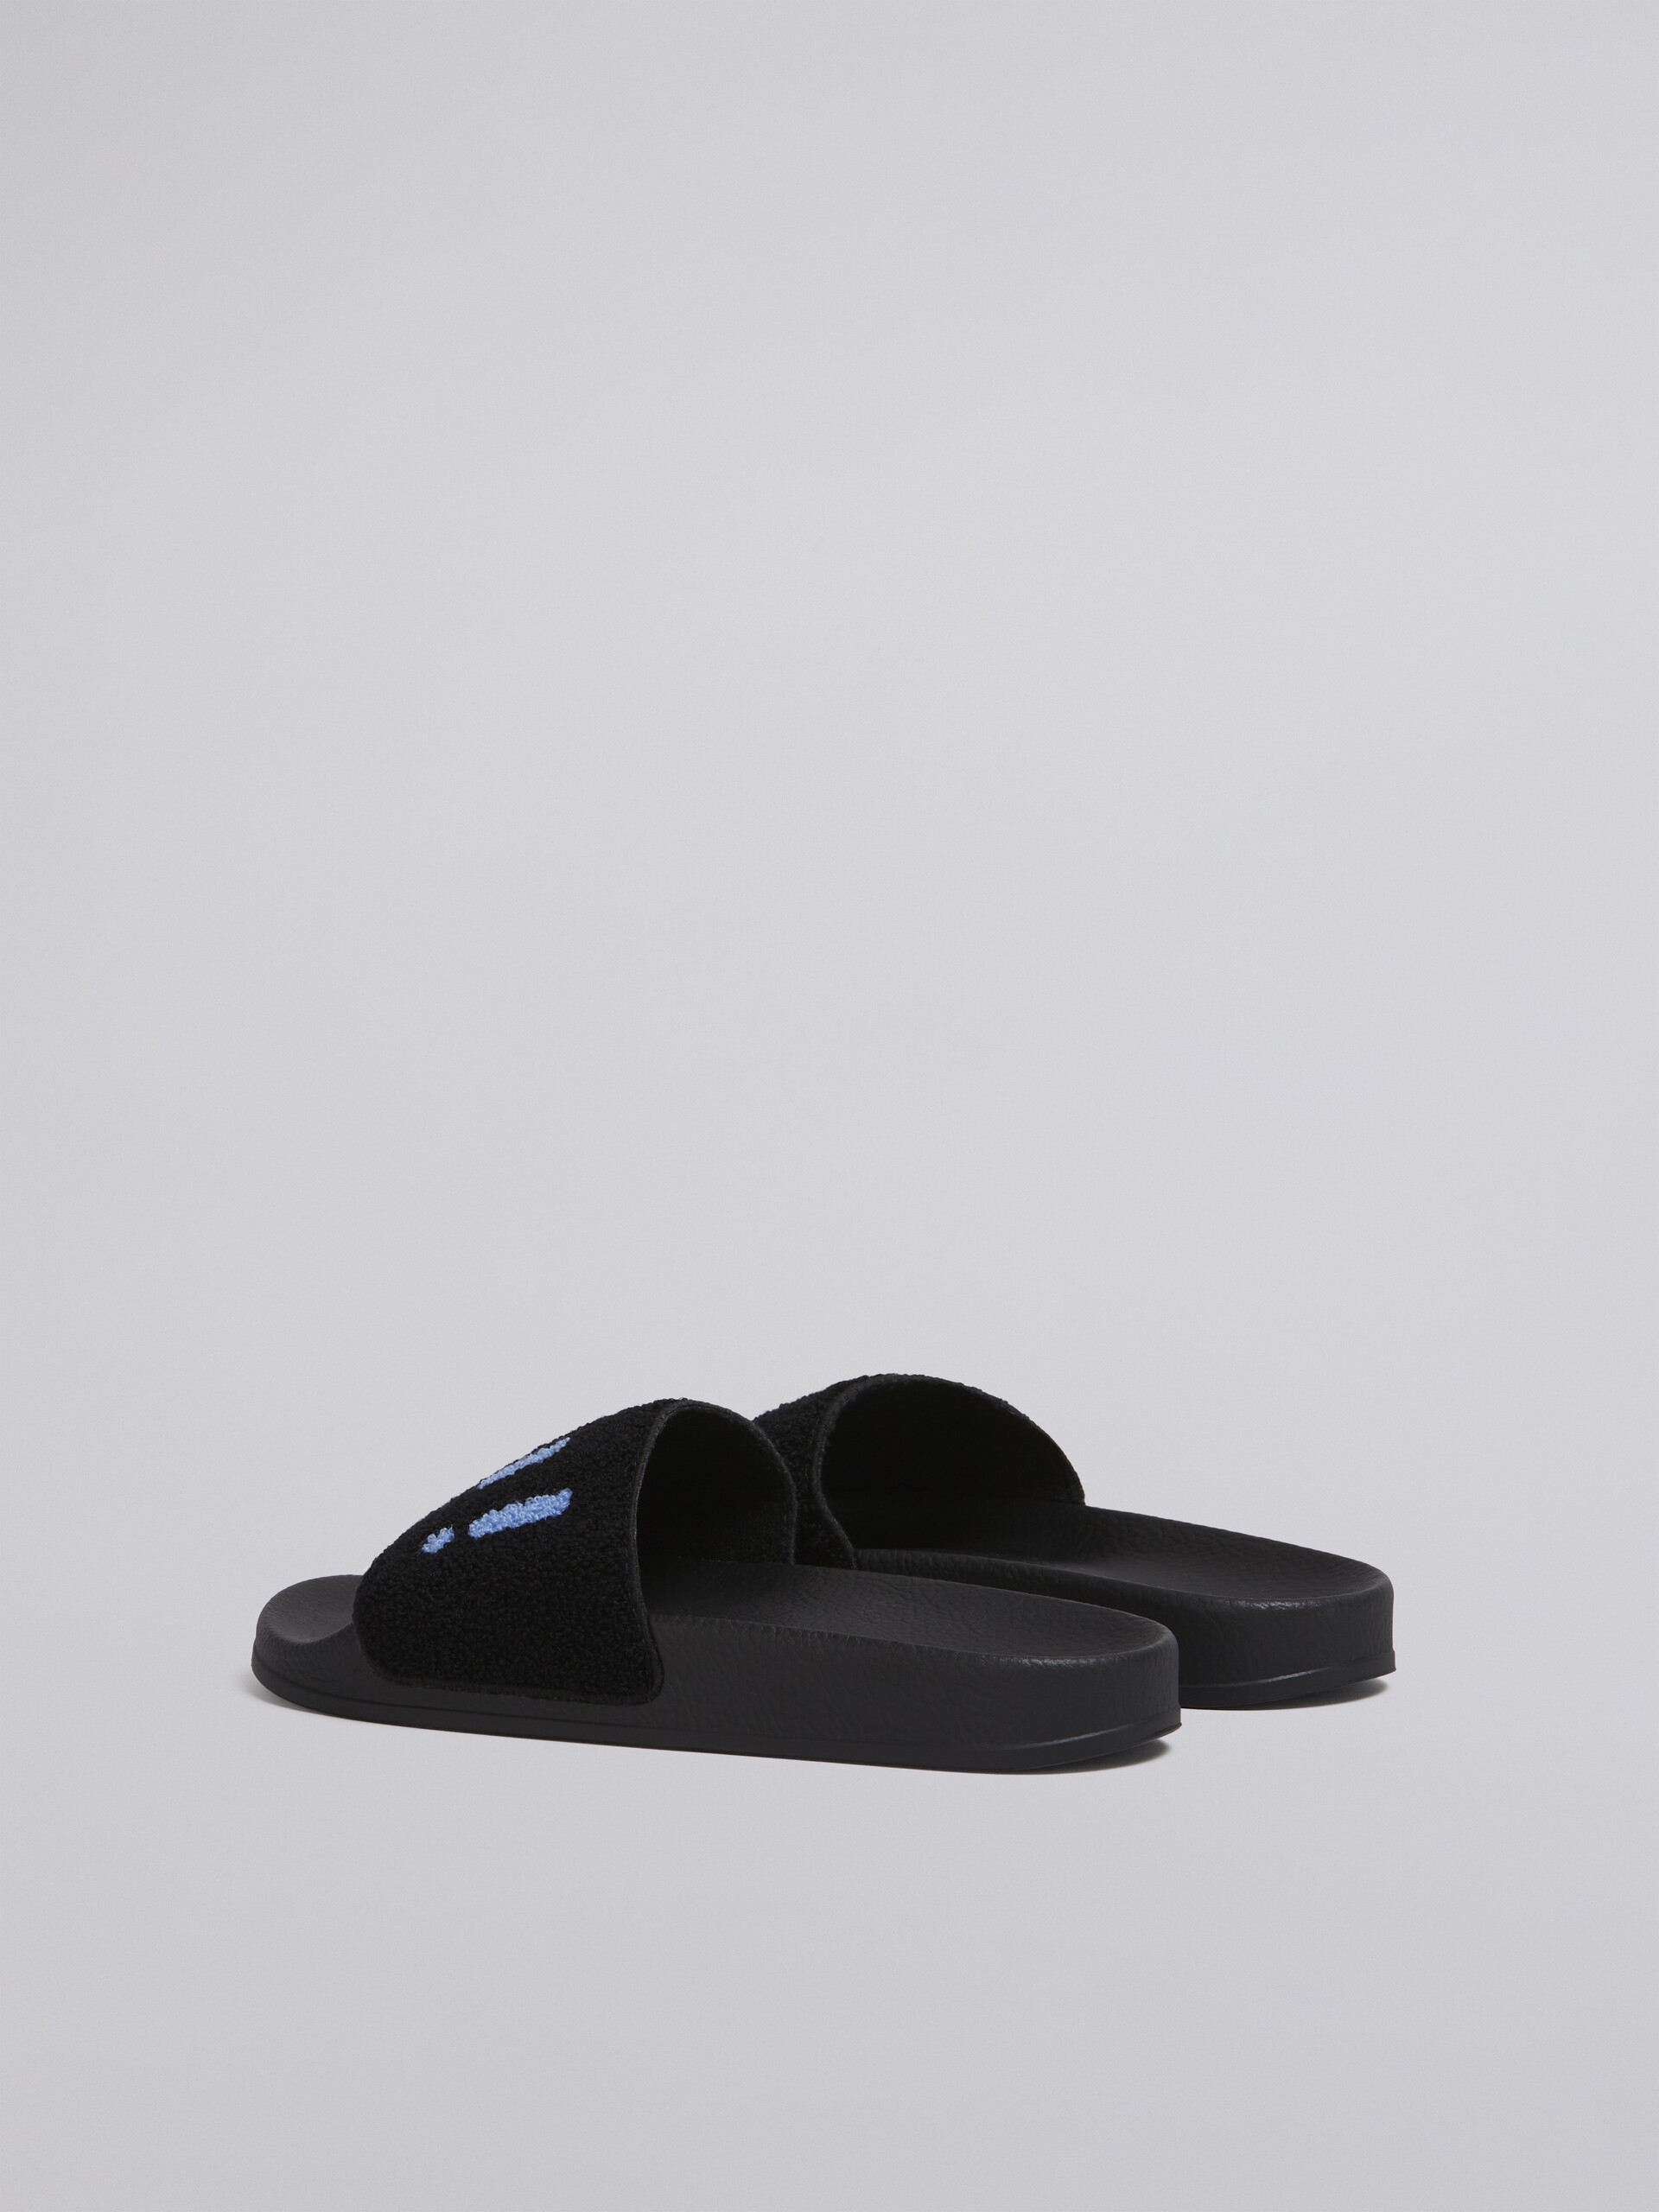 Rubber sandal with black and blue terry-cloth band - Sandals - Image 3